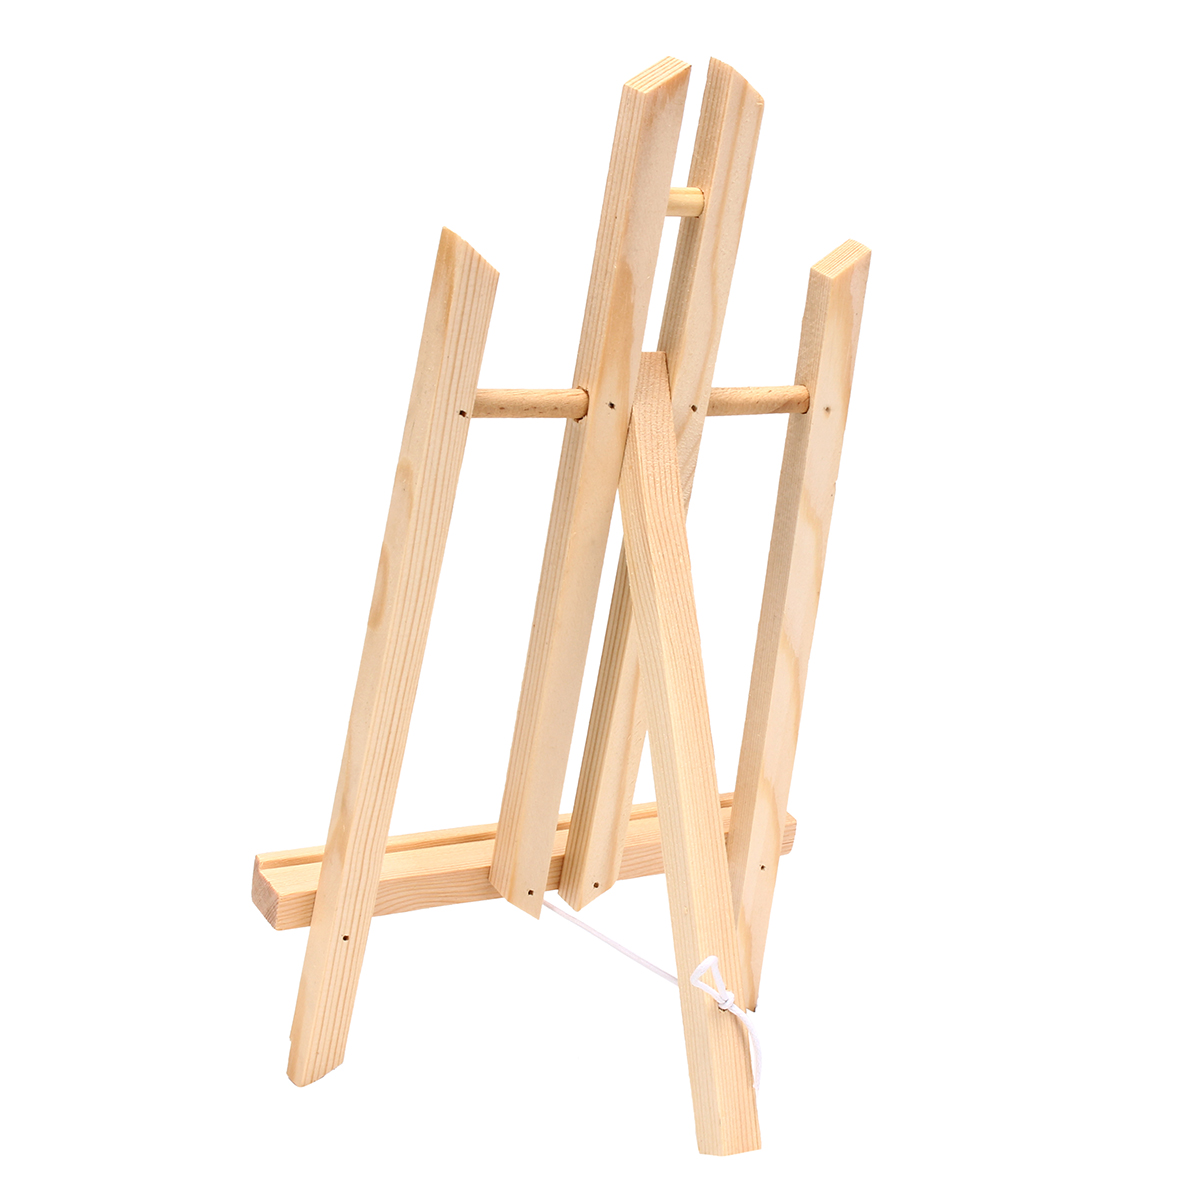 Durable-Wood-Wooden-Easels-Display-Tripod-Art-Artist-Painting-Stand-Paint-Rack-1368883-6